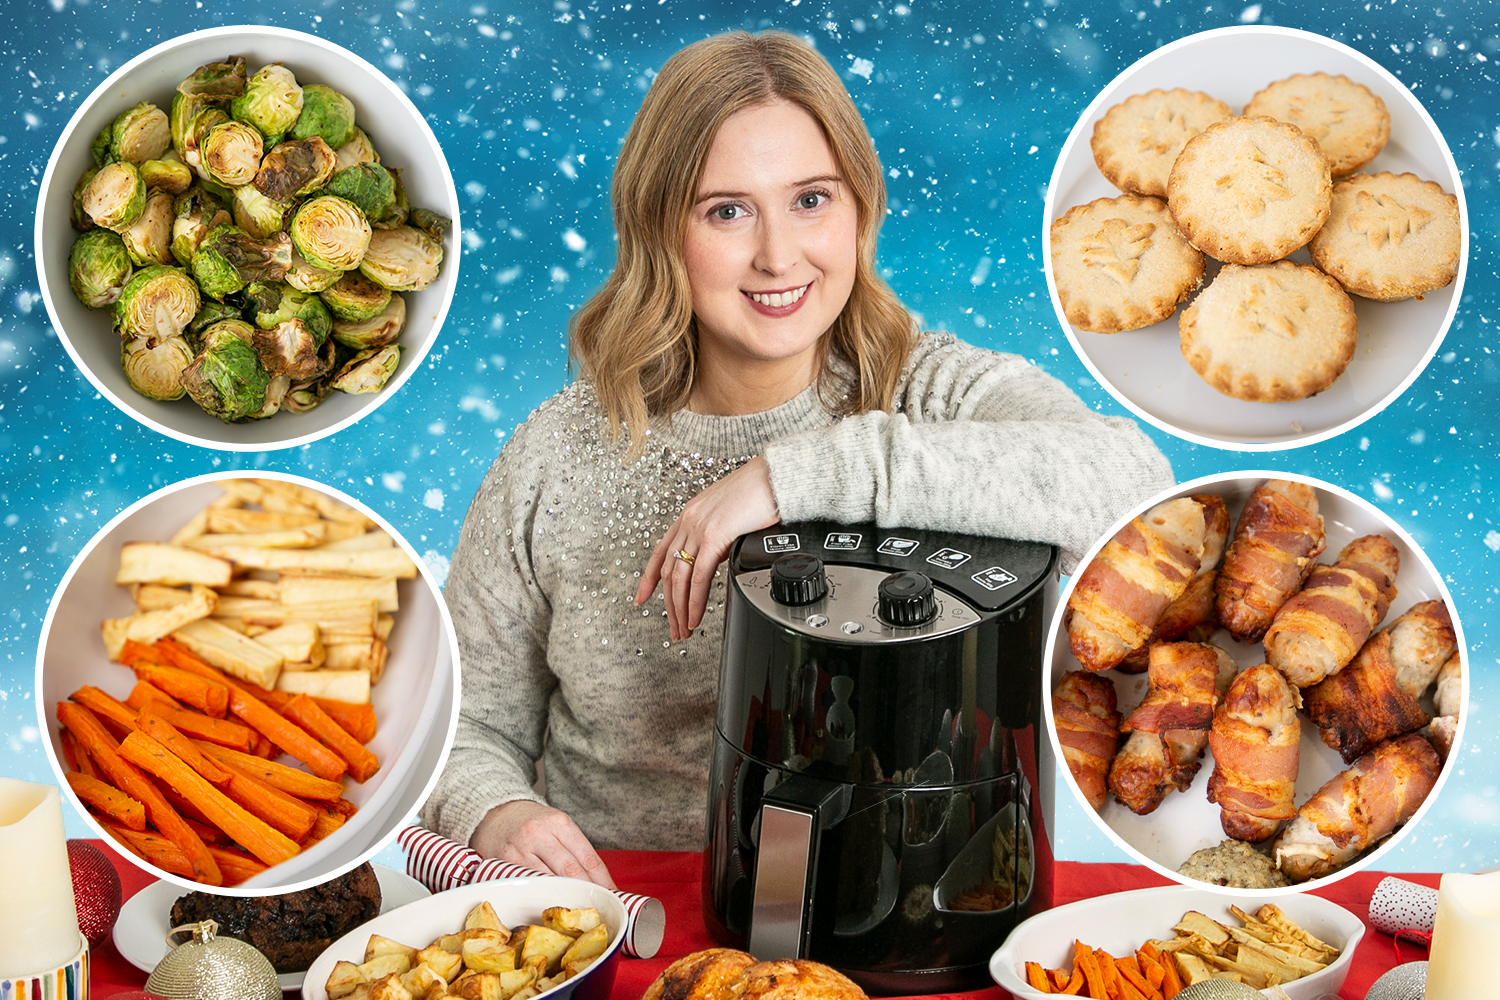 I cooked an entire Christmas dinner in an air fryer - the results shocked me